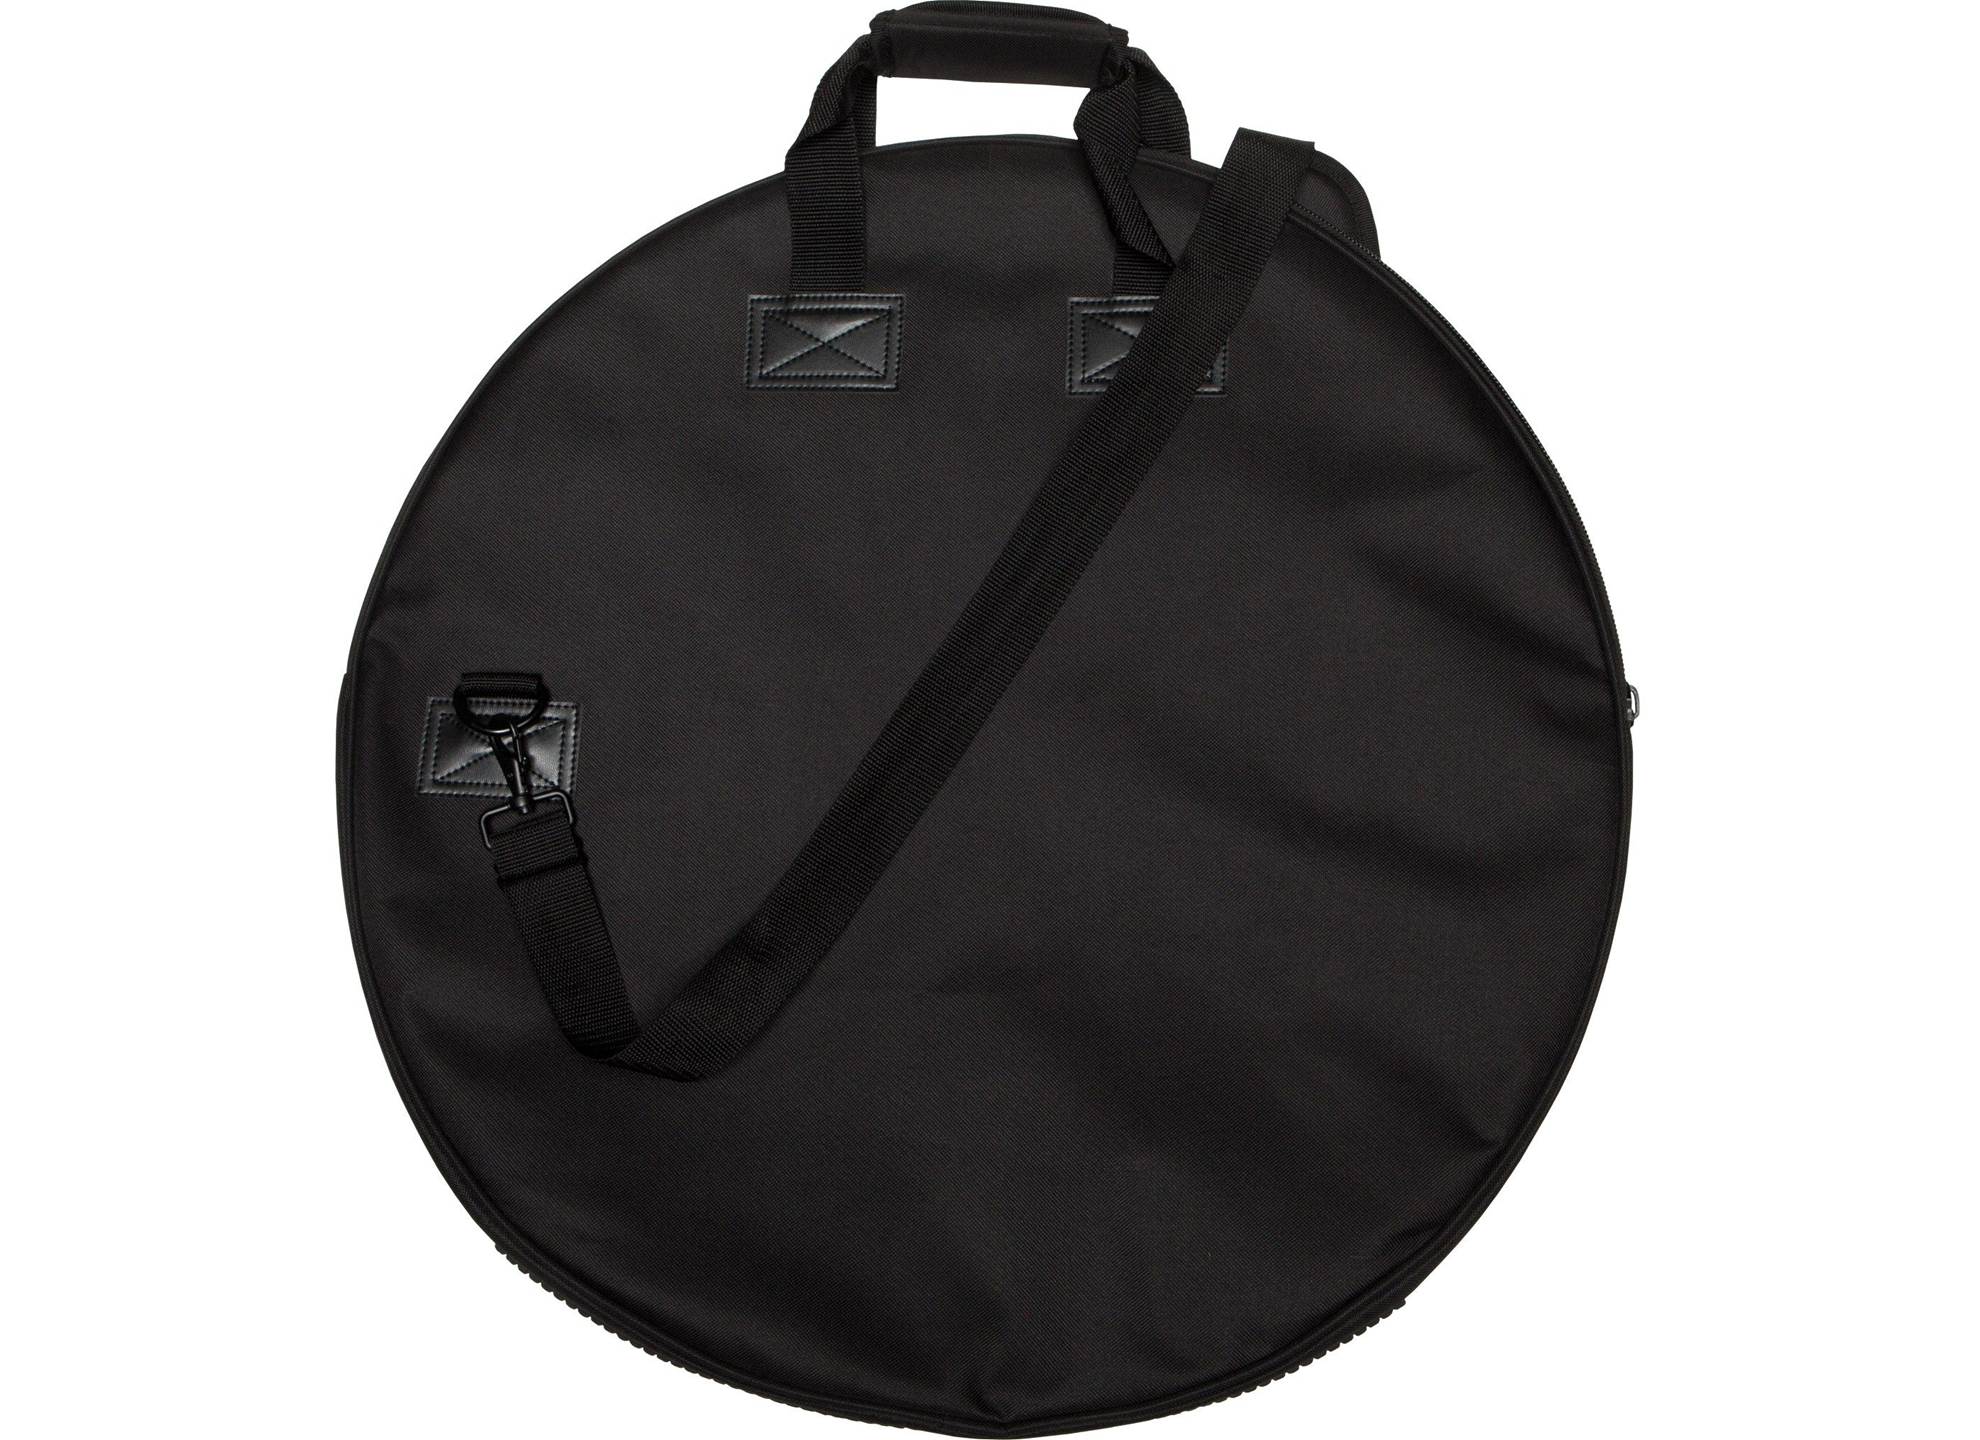 ZCB22D Deluxe Cymbal Bag 22 tum